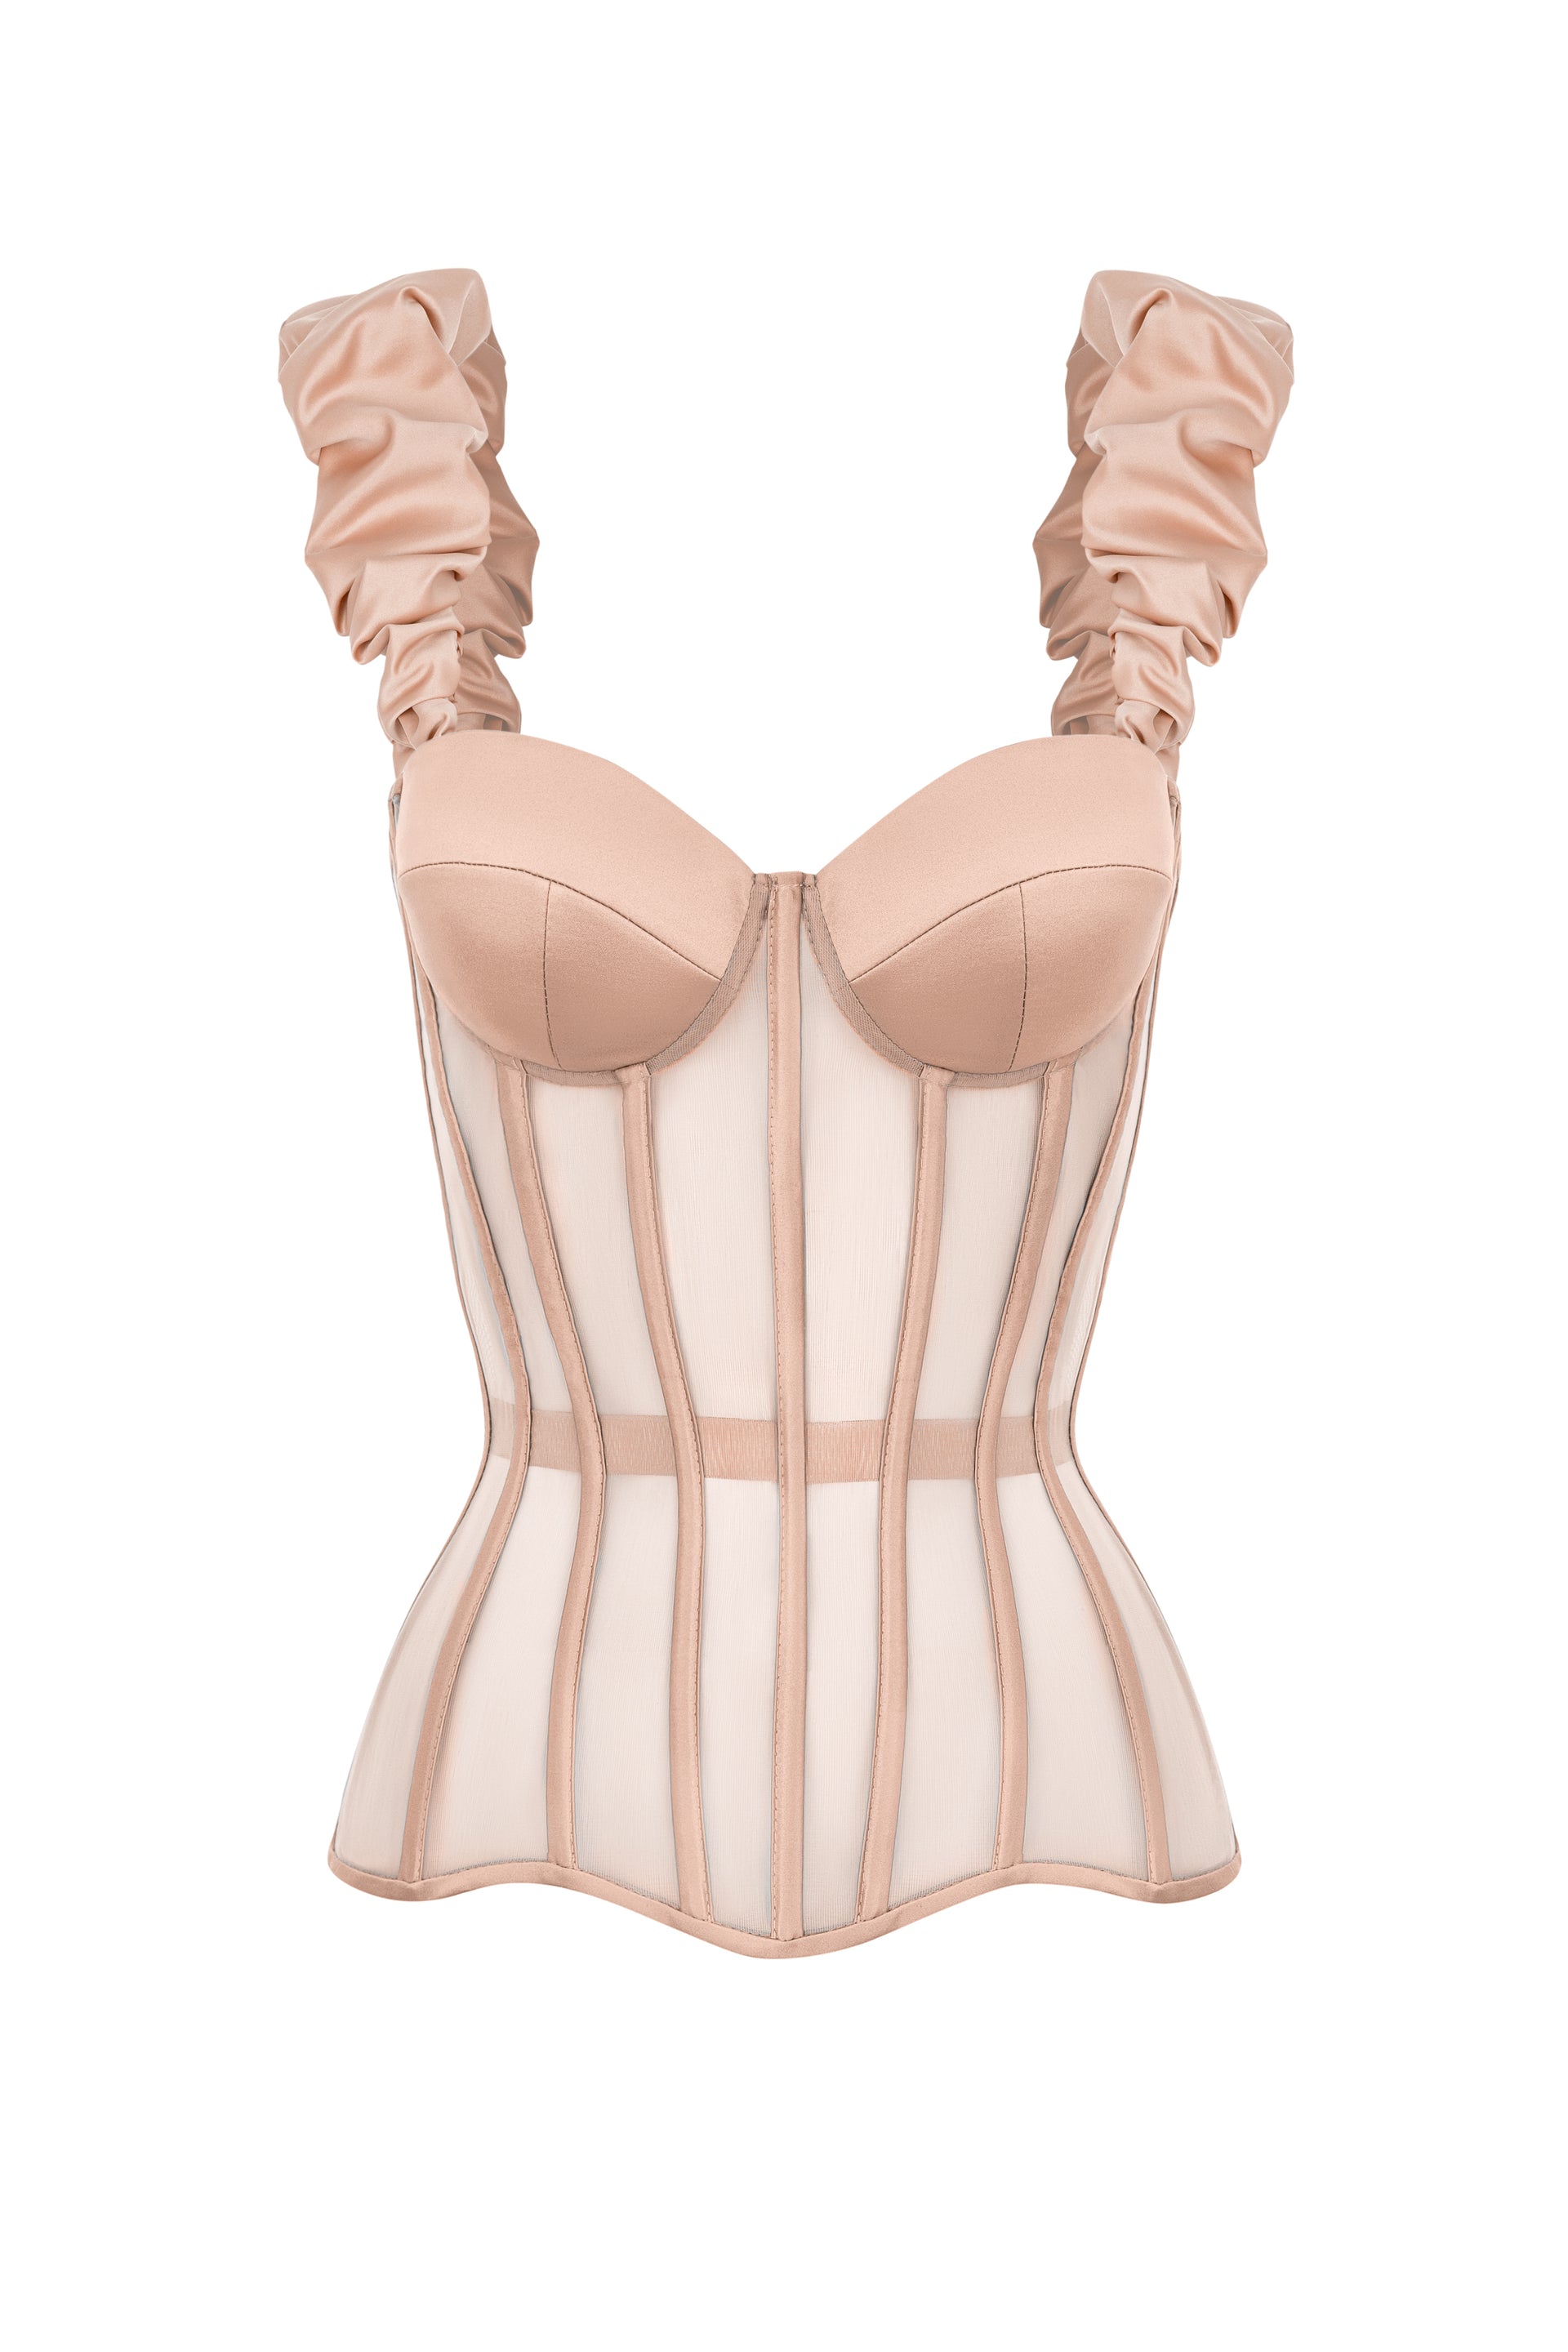 Beige satin corset with reliefs and detachable straps